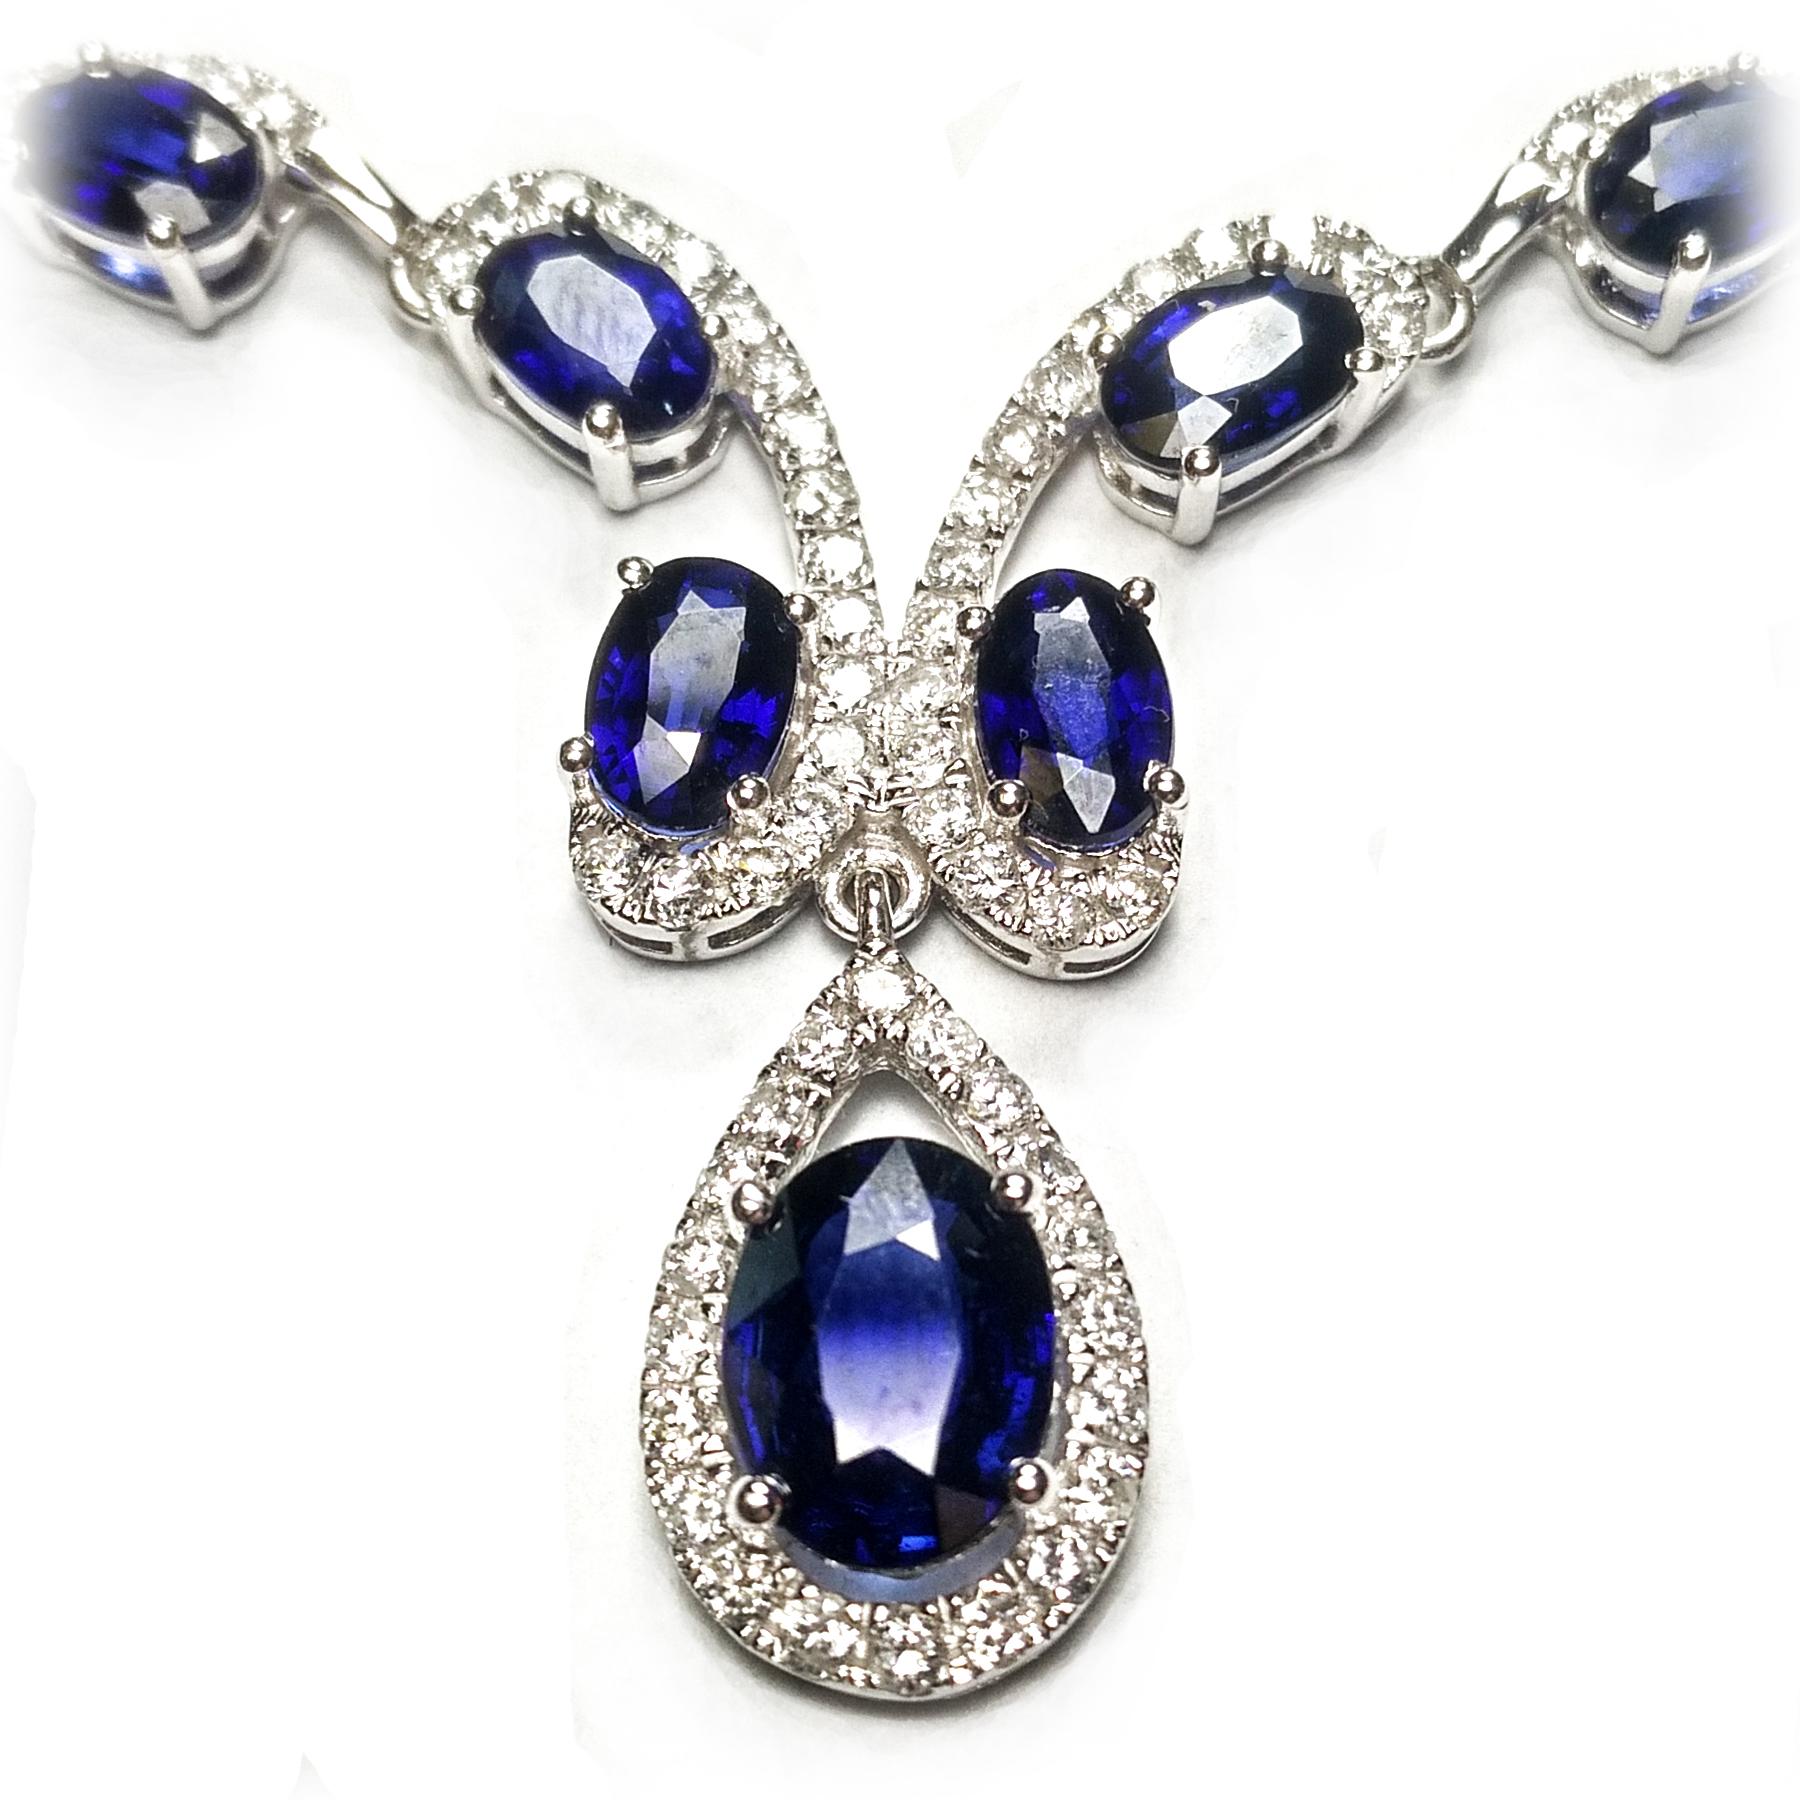 Sapphire 25.34 carats oval faceted natural deep blue-violatish tint, with diamond necklace. Handcrafted scalloped design with round brilliant cut diamonds, oval sapphires mounted in open basket, with 4 prongs, attached with pear shape dangling